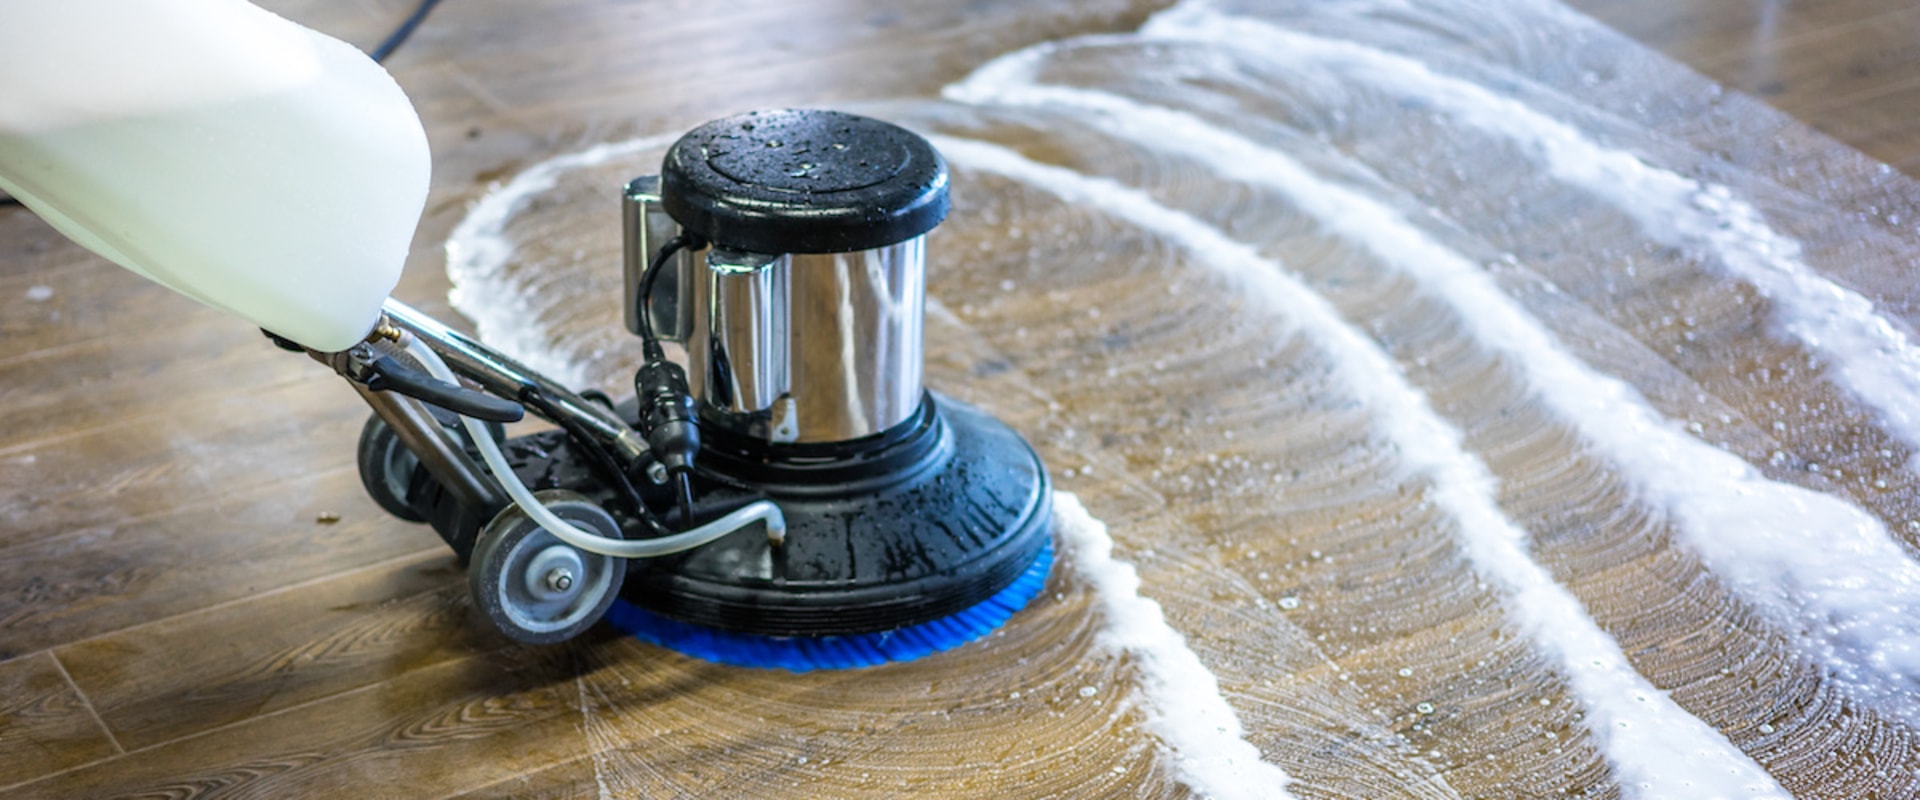 The Ultimate Guide to Choosing the Best Liquid Cleaners for Your Wood Floors